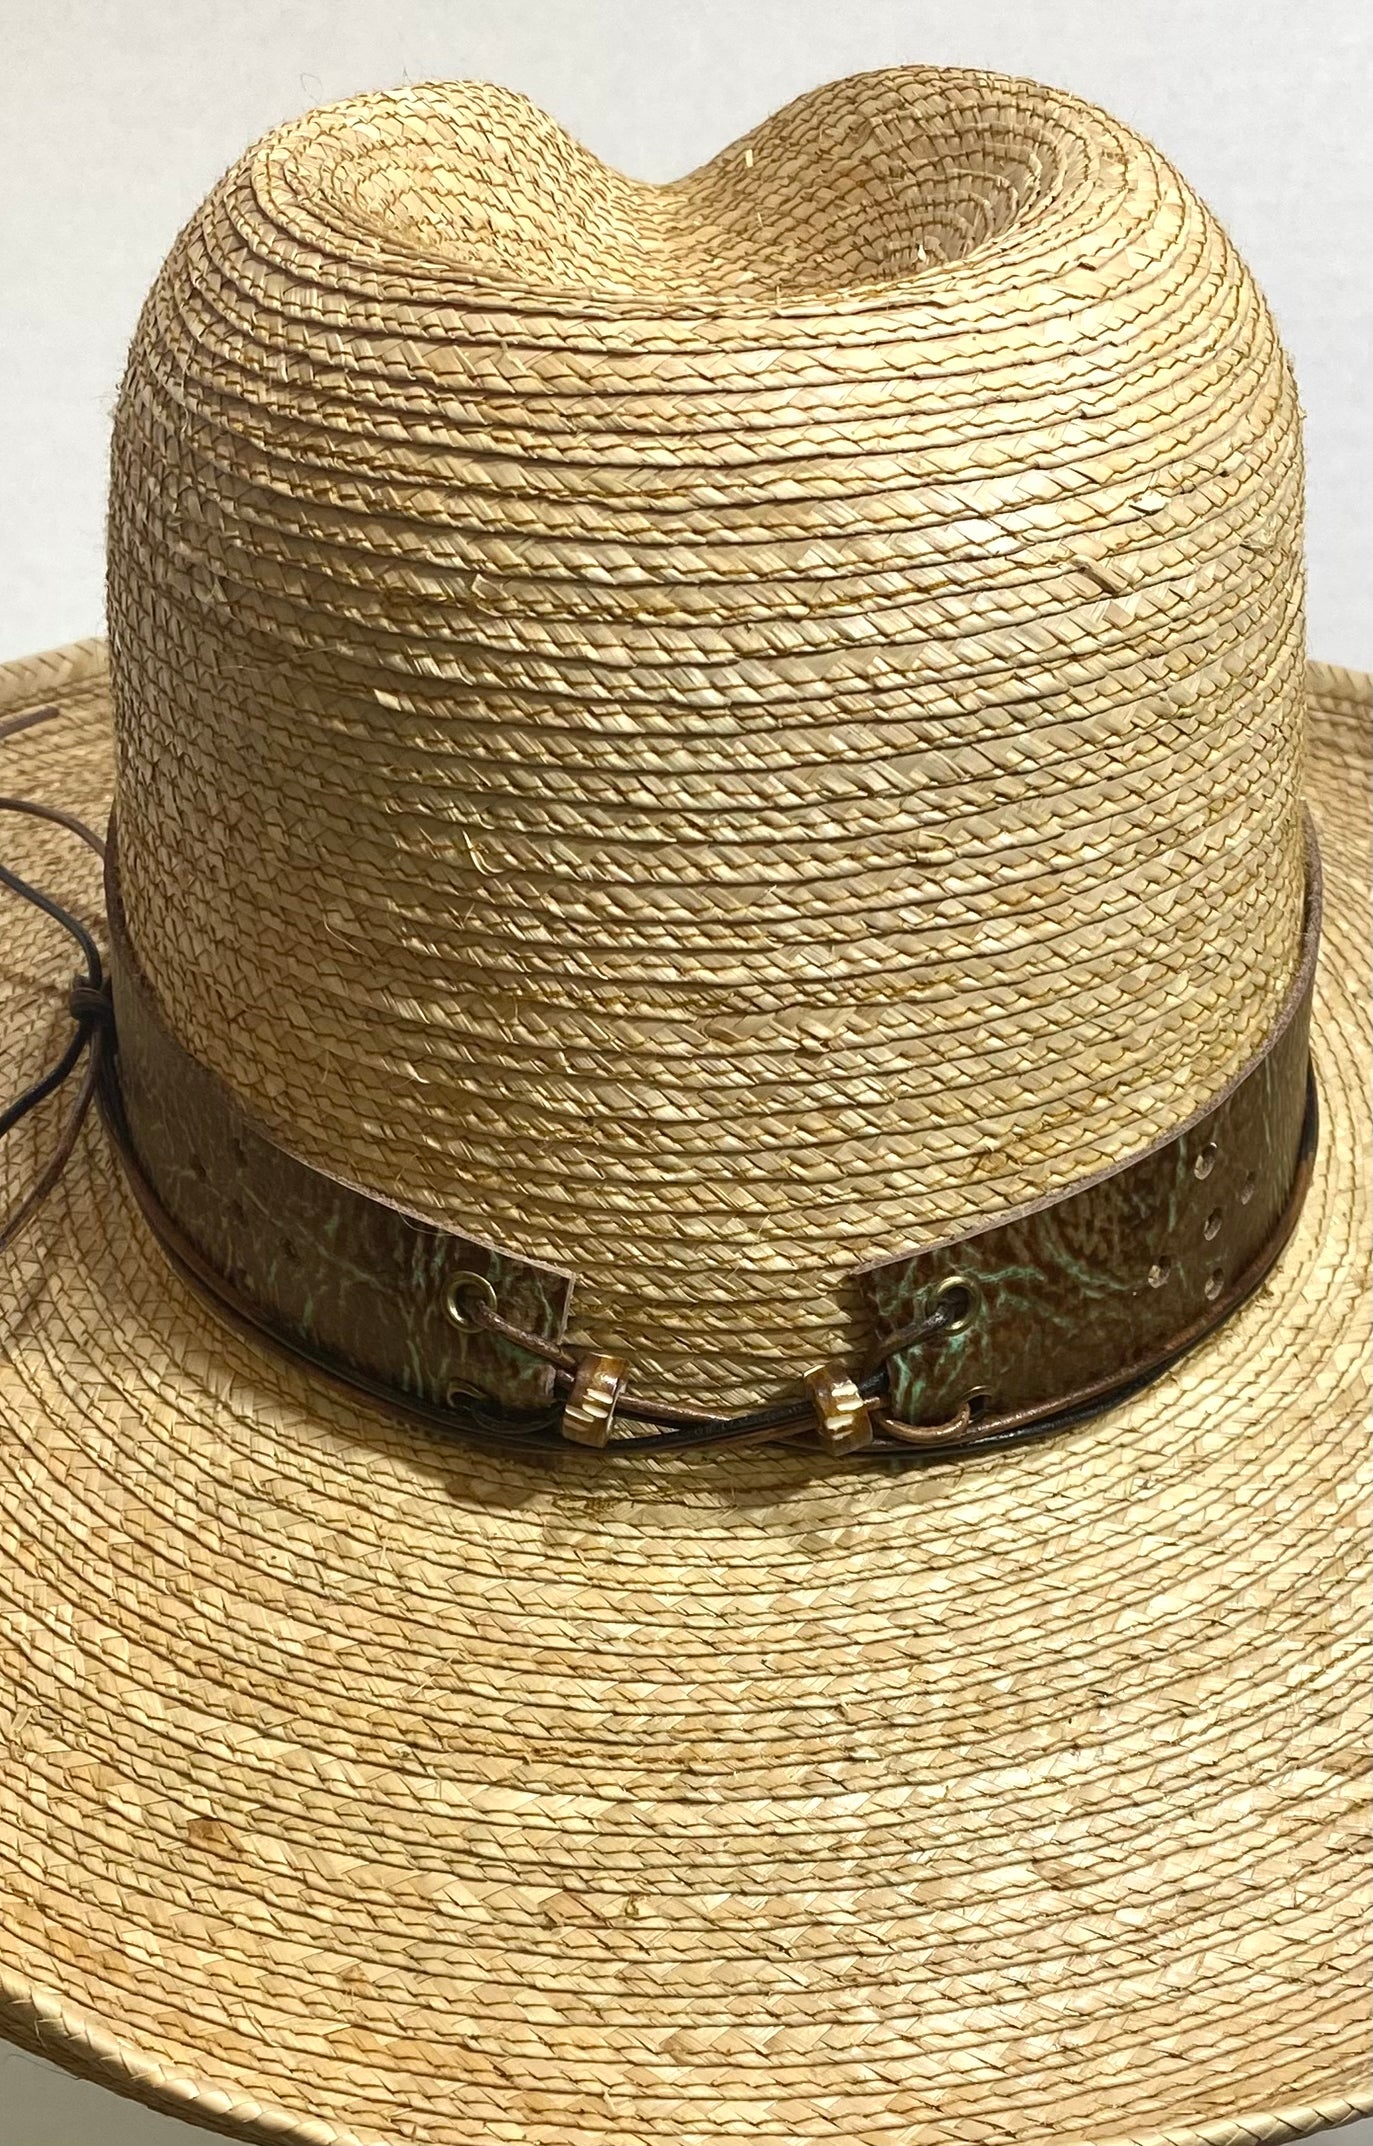 Distressed Leather & Turquoise Hatband